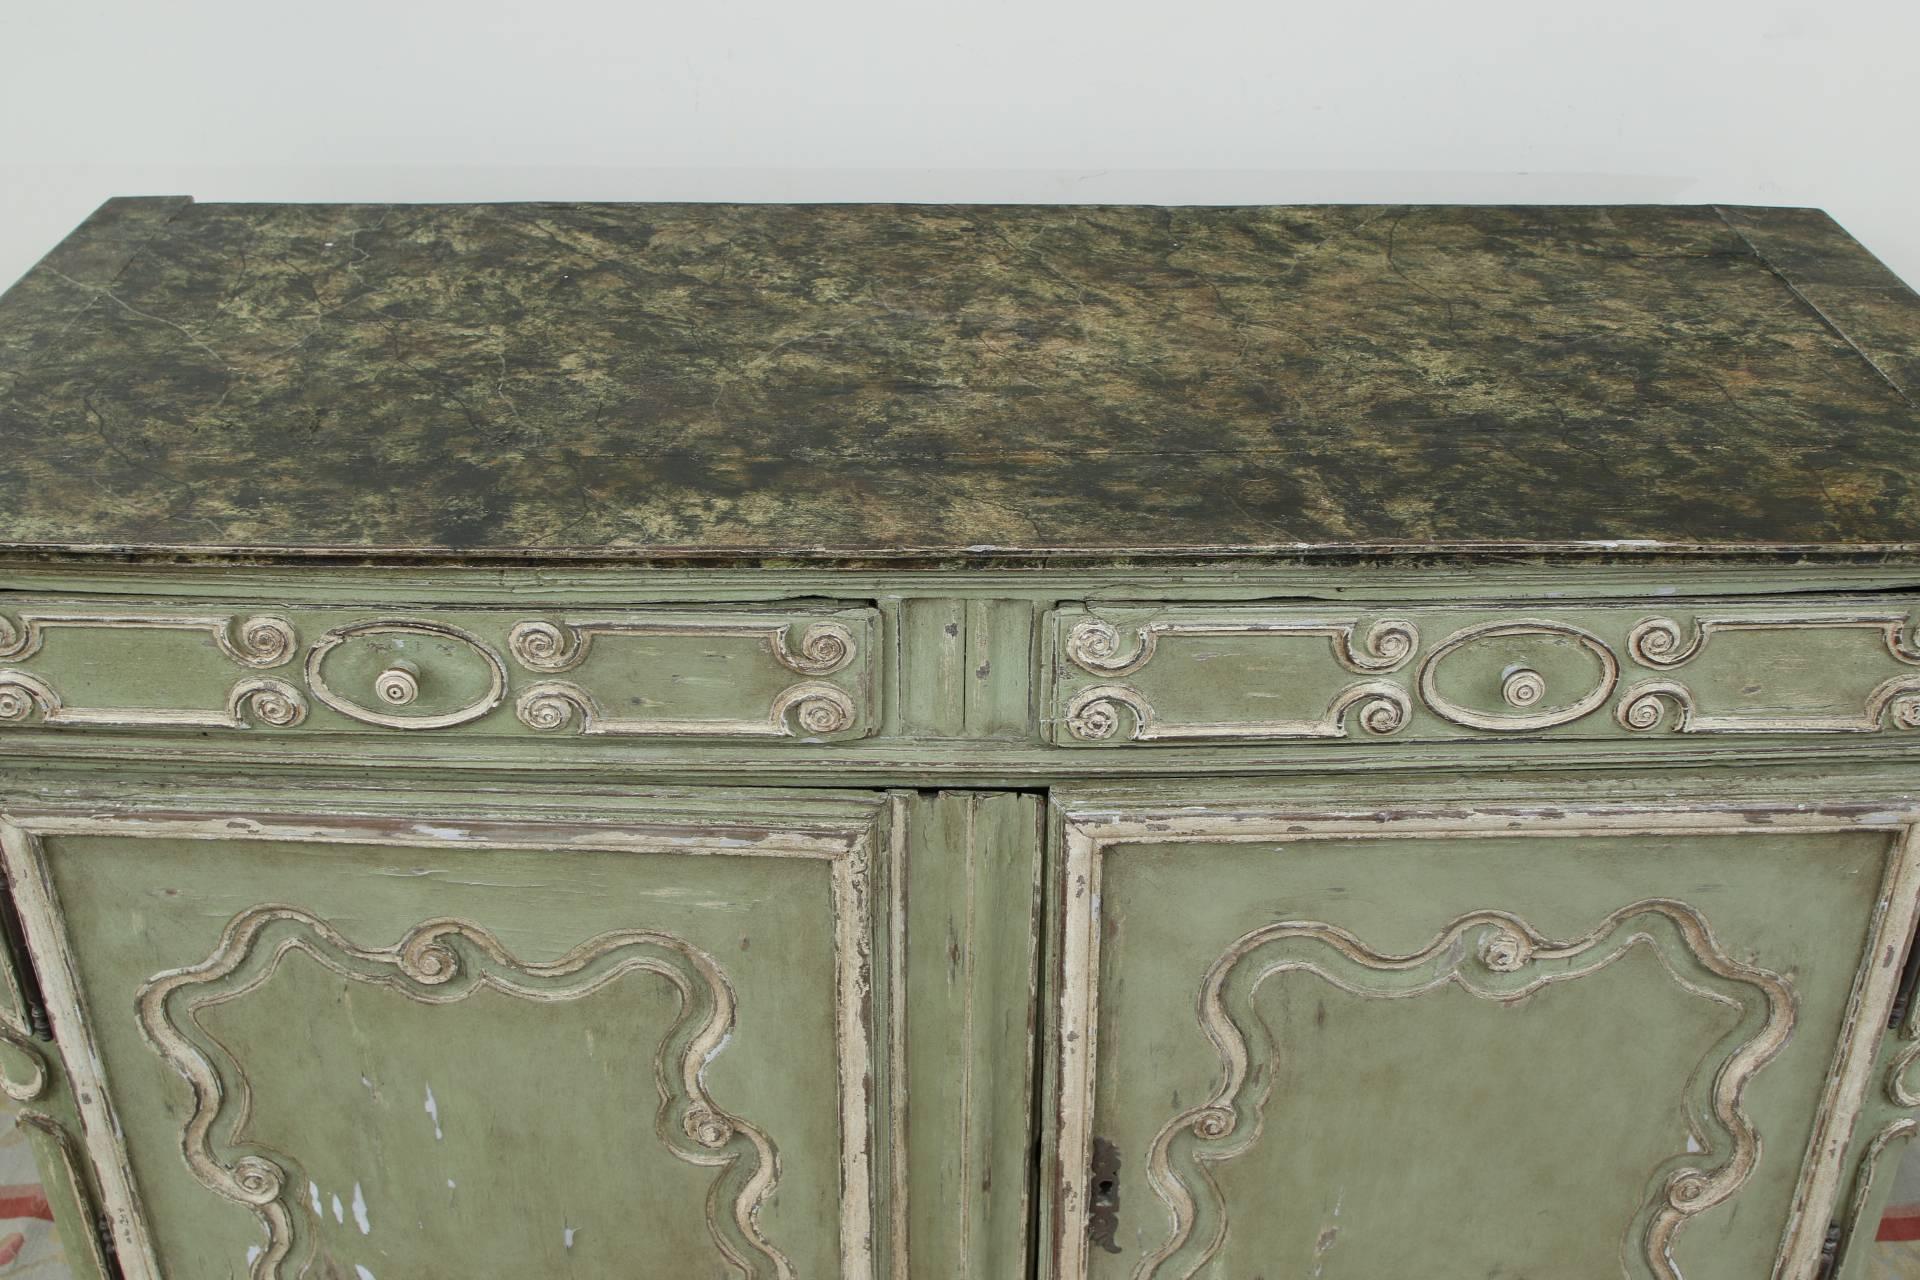 Painted French Provincial Green Paint Decorated Cabinet, Early 19th Century